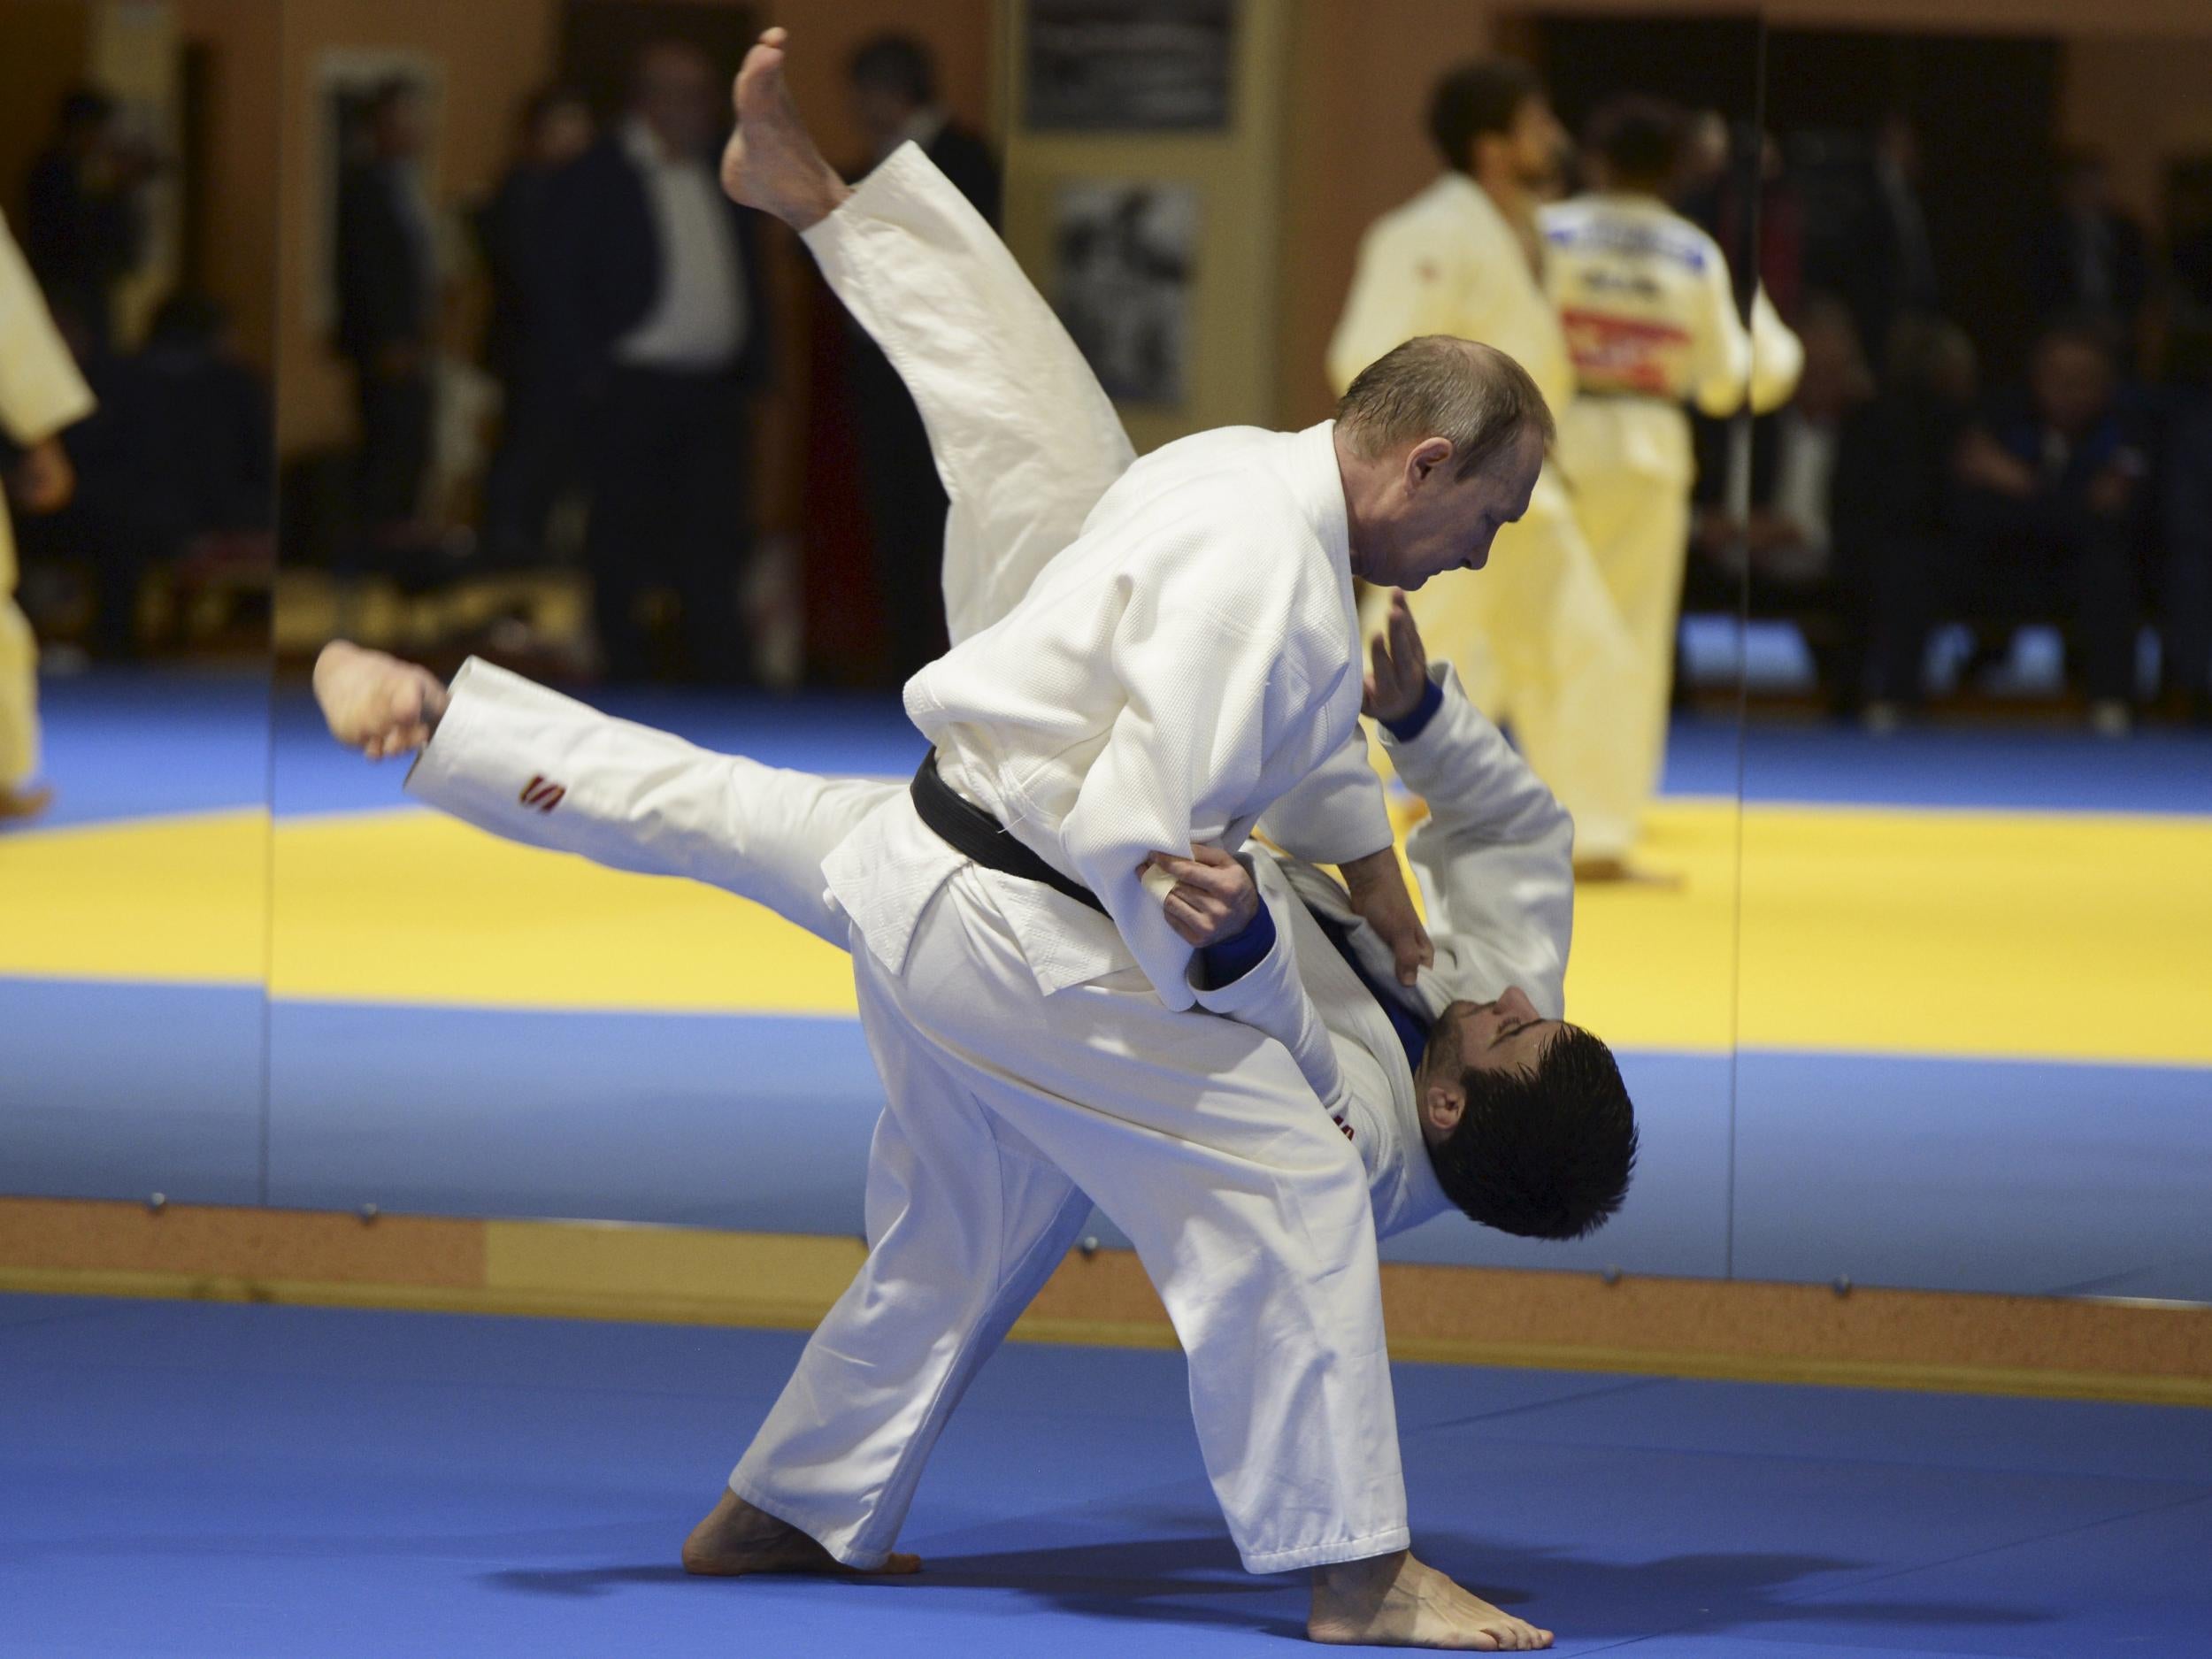 Vladimir Putin takes part in a training session with members of the Russian national judo team in Sochi on 8 January 2016